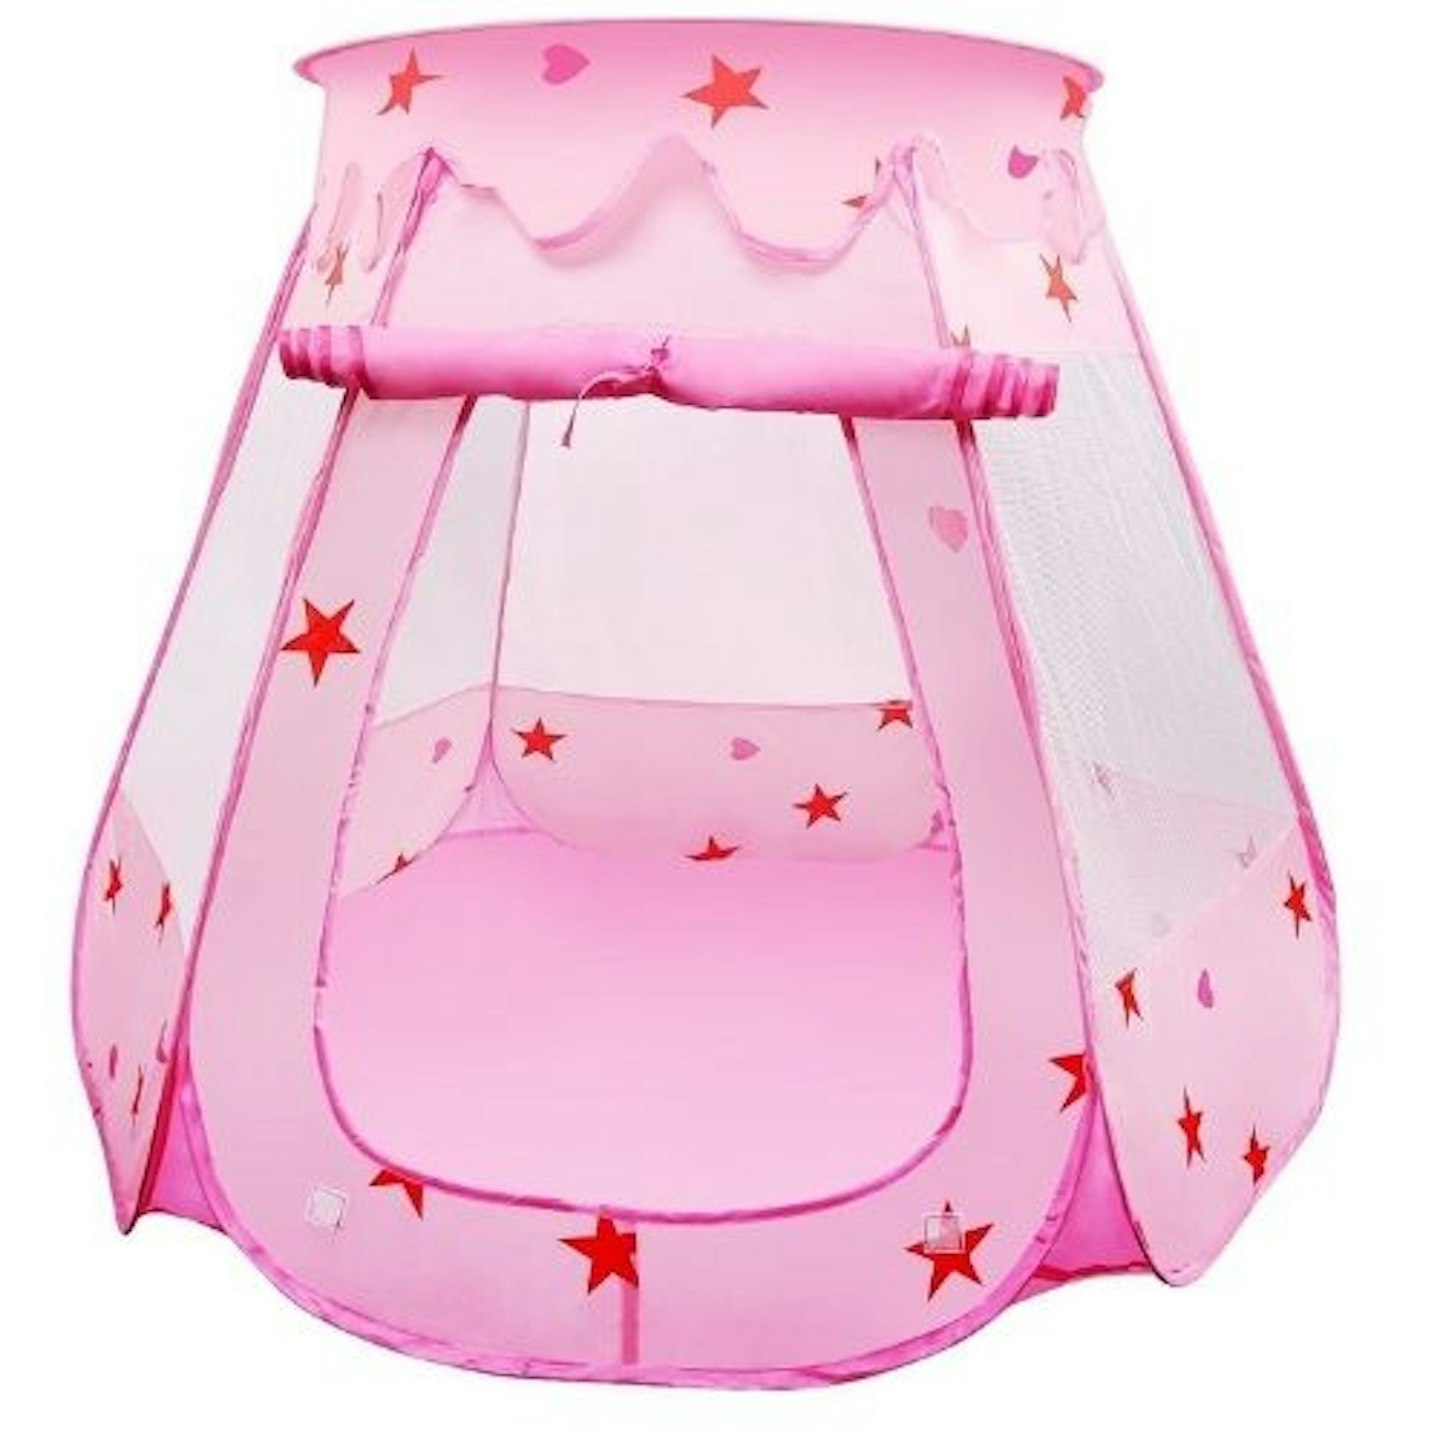 BelleStyle Kids Play Tent